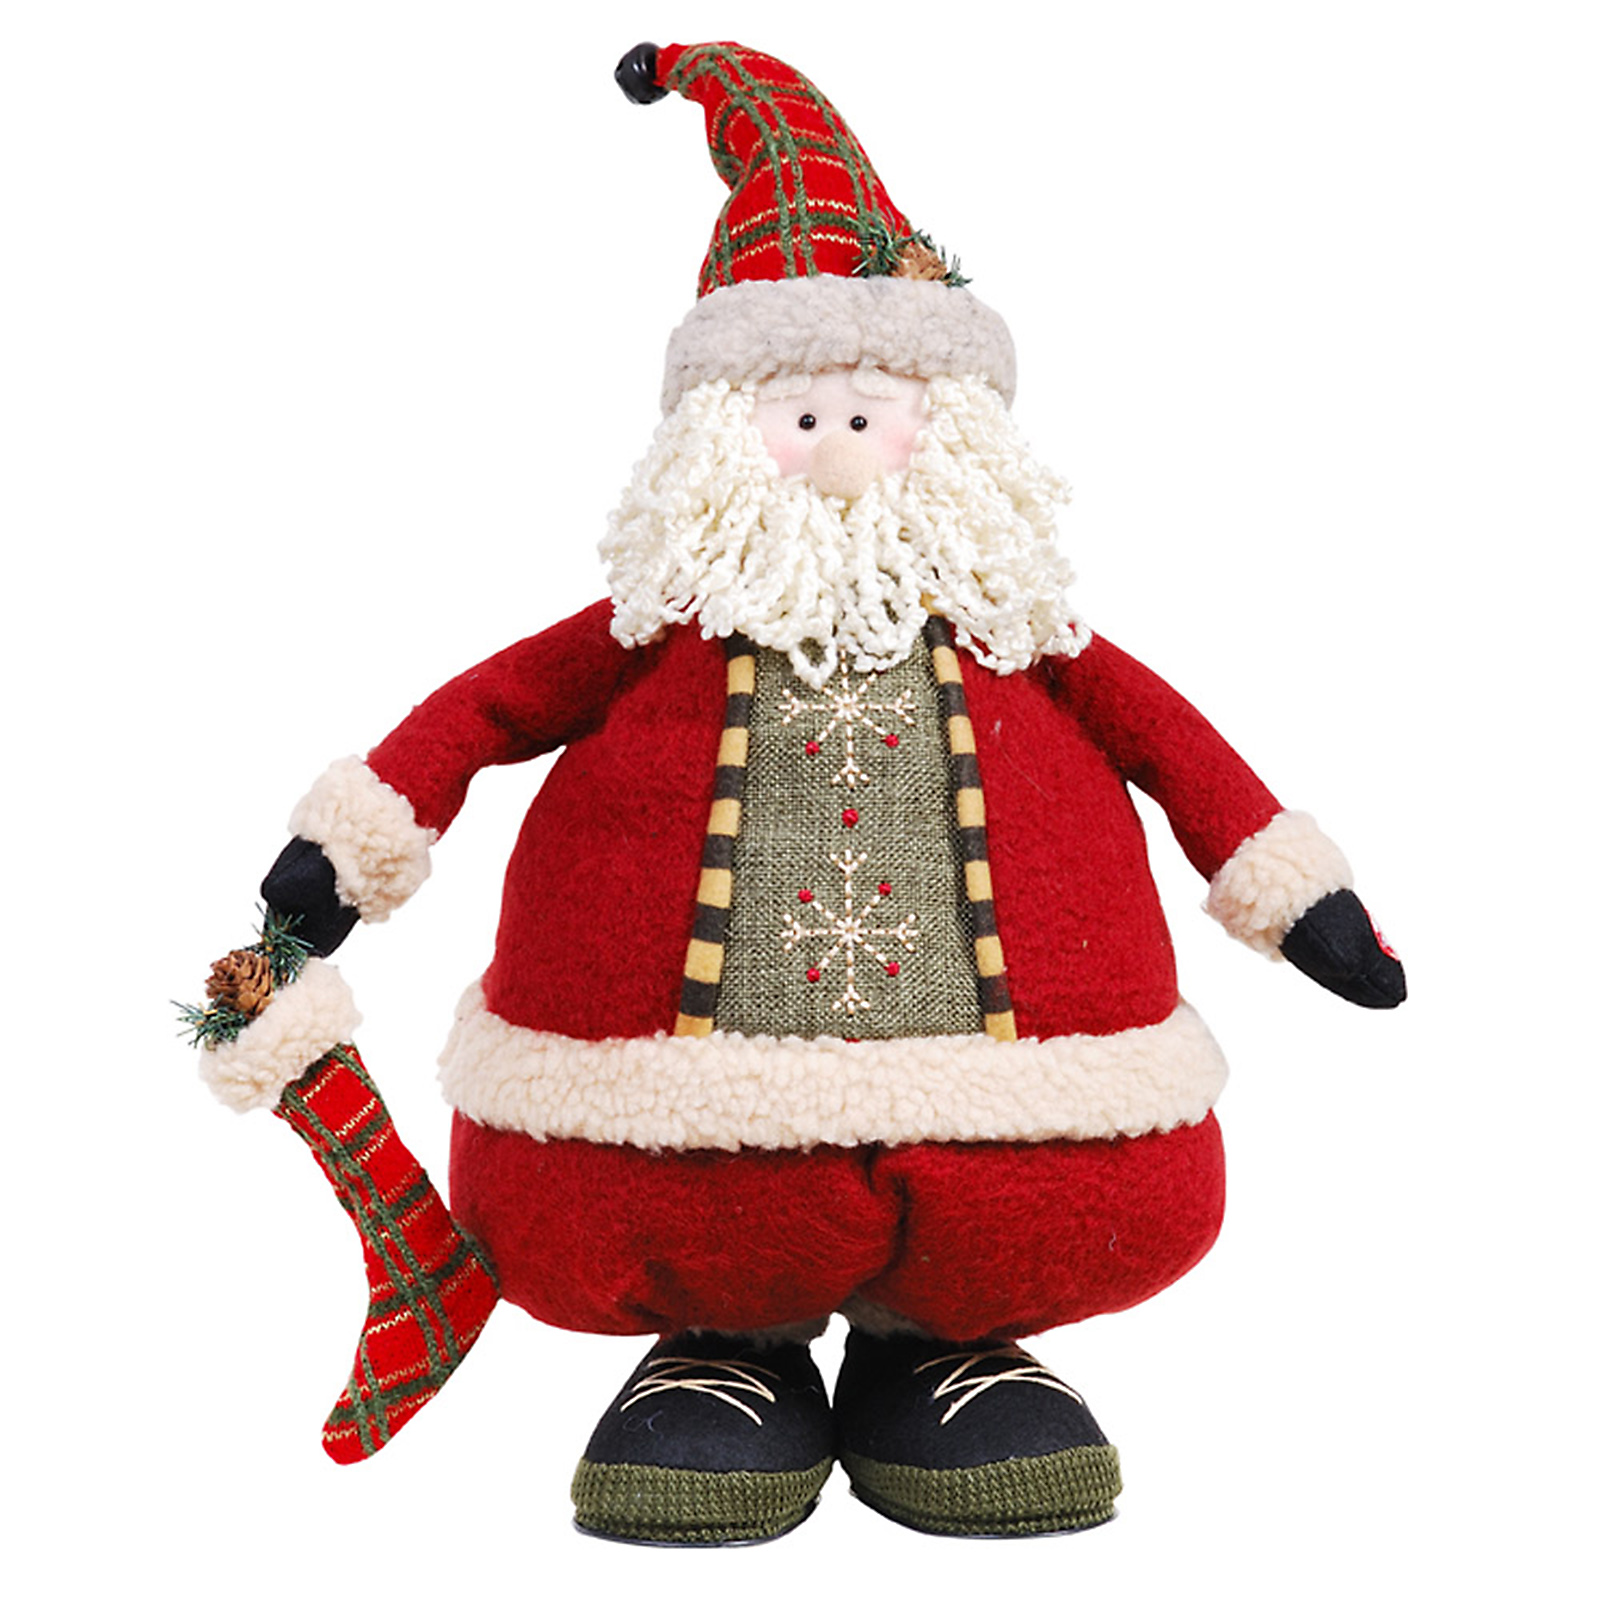 10"x7.5"x20" Up-down santa with flapping arms